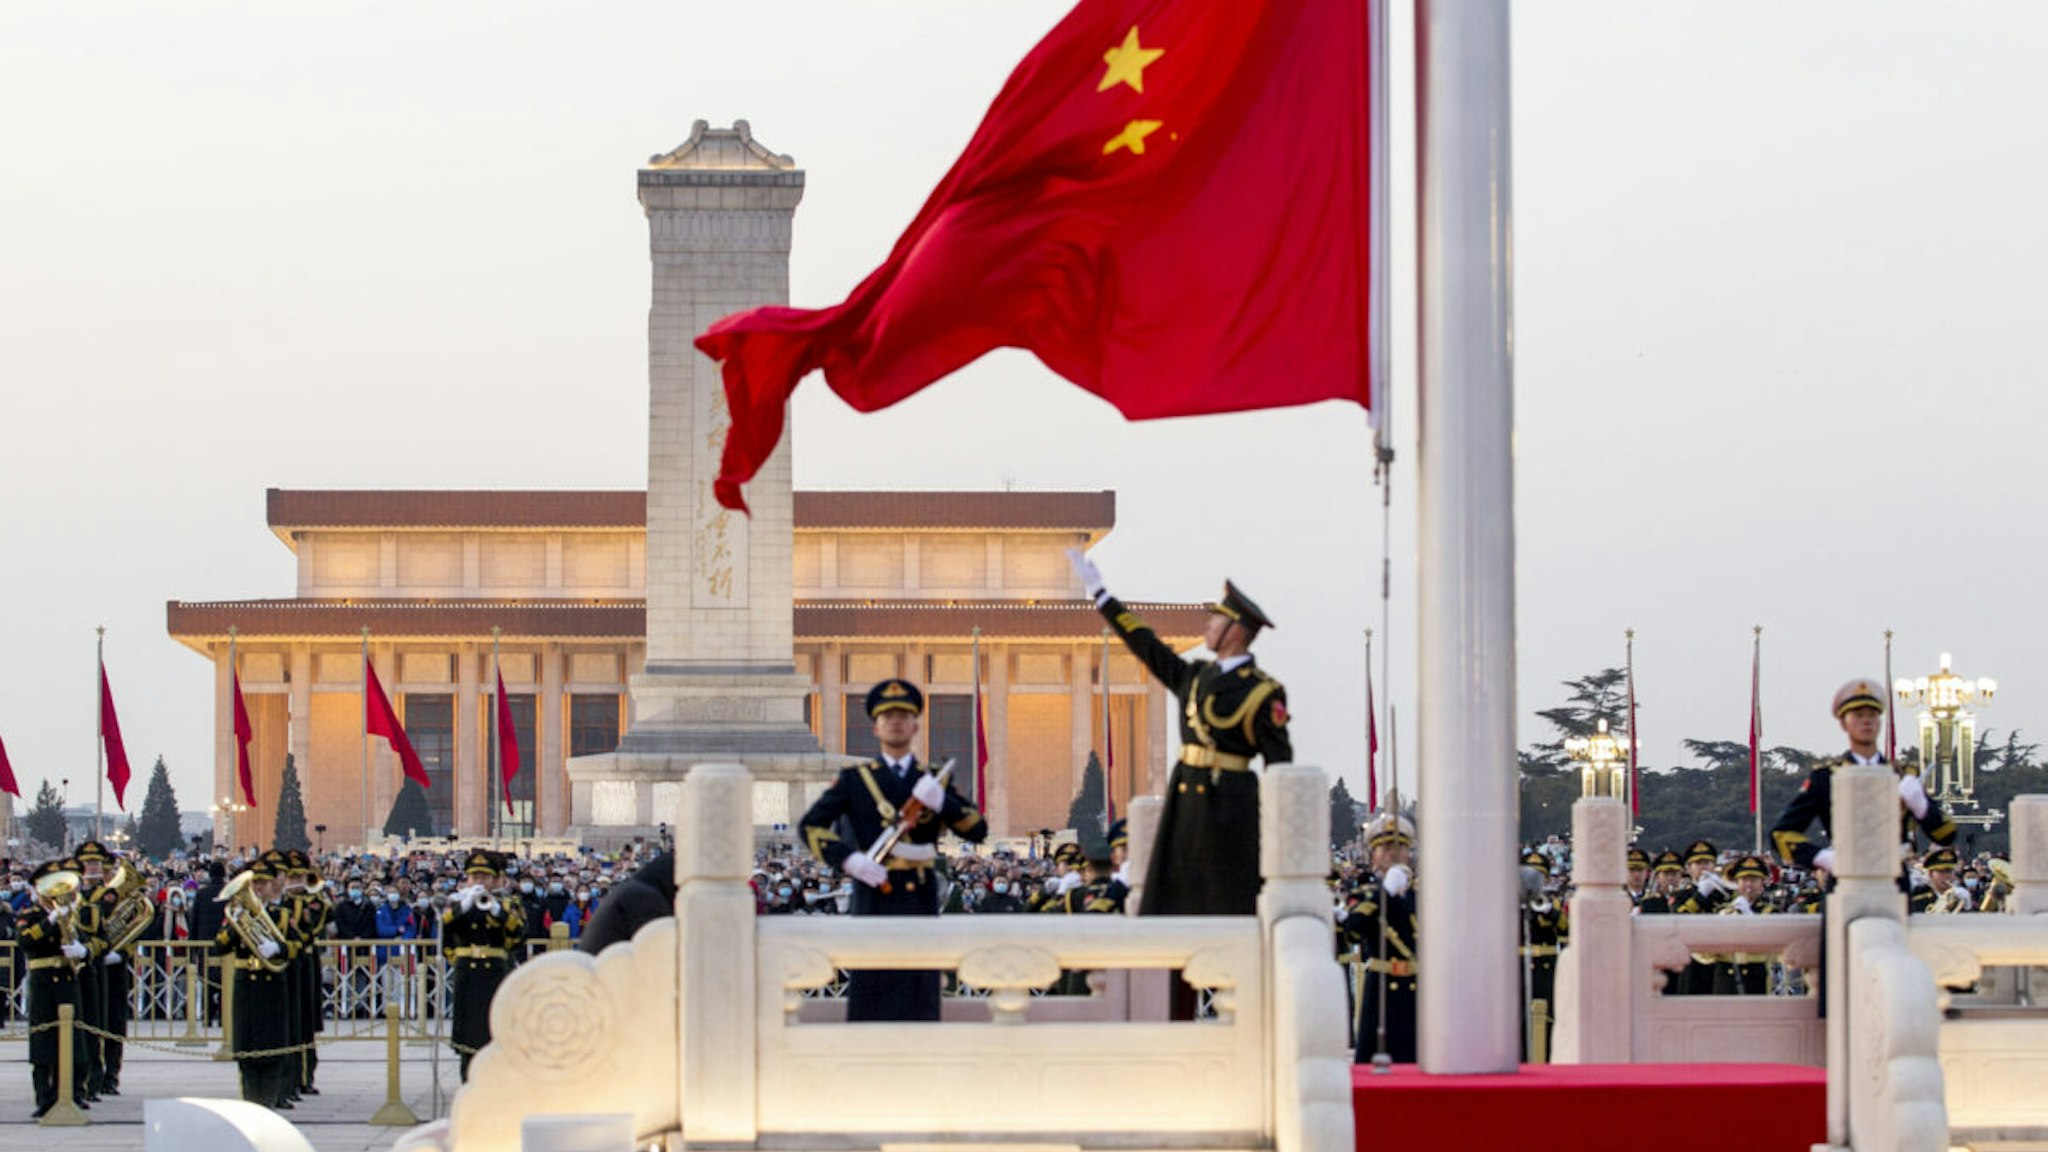 BEIJING, CHINA - JANUARY 01: Soldiers of the People's Liberation Army (PLA) honor guard perform the flag-raising ceremony at Tiananmen Square on New Year's Day on January 1, 2022 in Beijing, China.